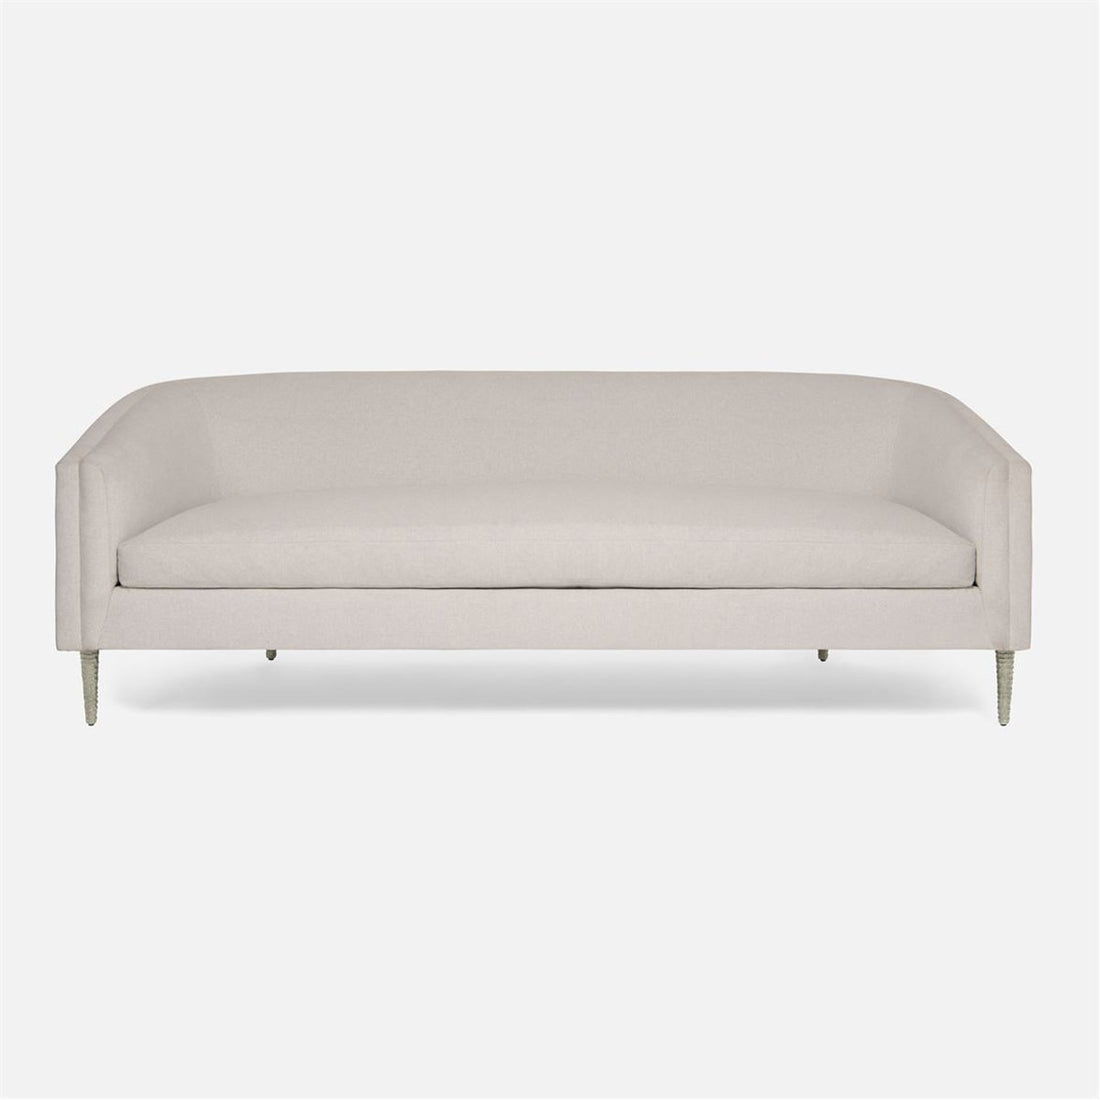 Made Goods Theron Upholstered Curved Back Sofa in Kern Fabric